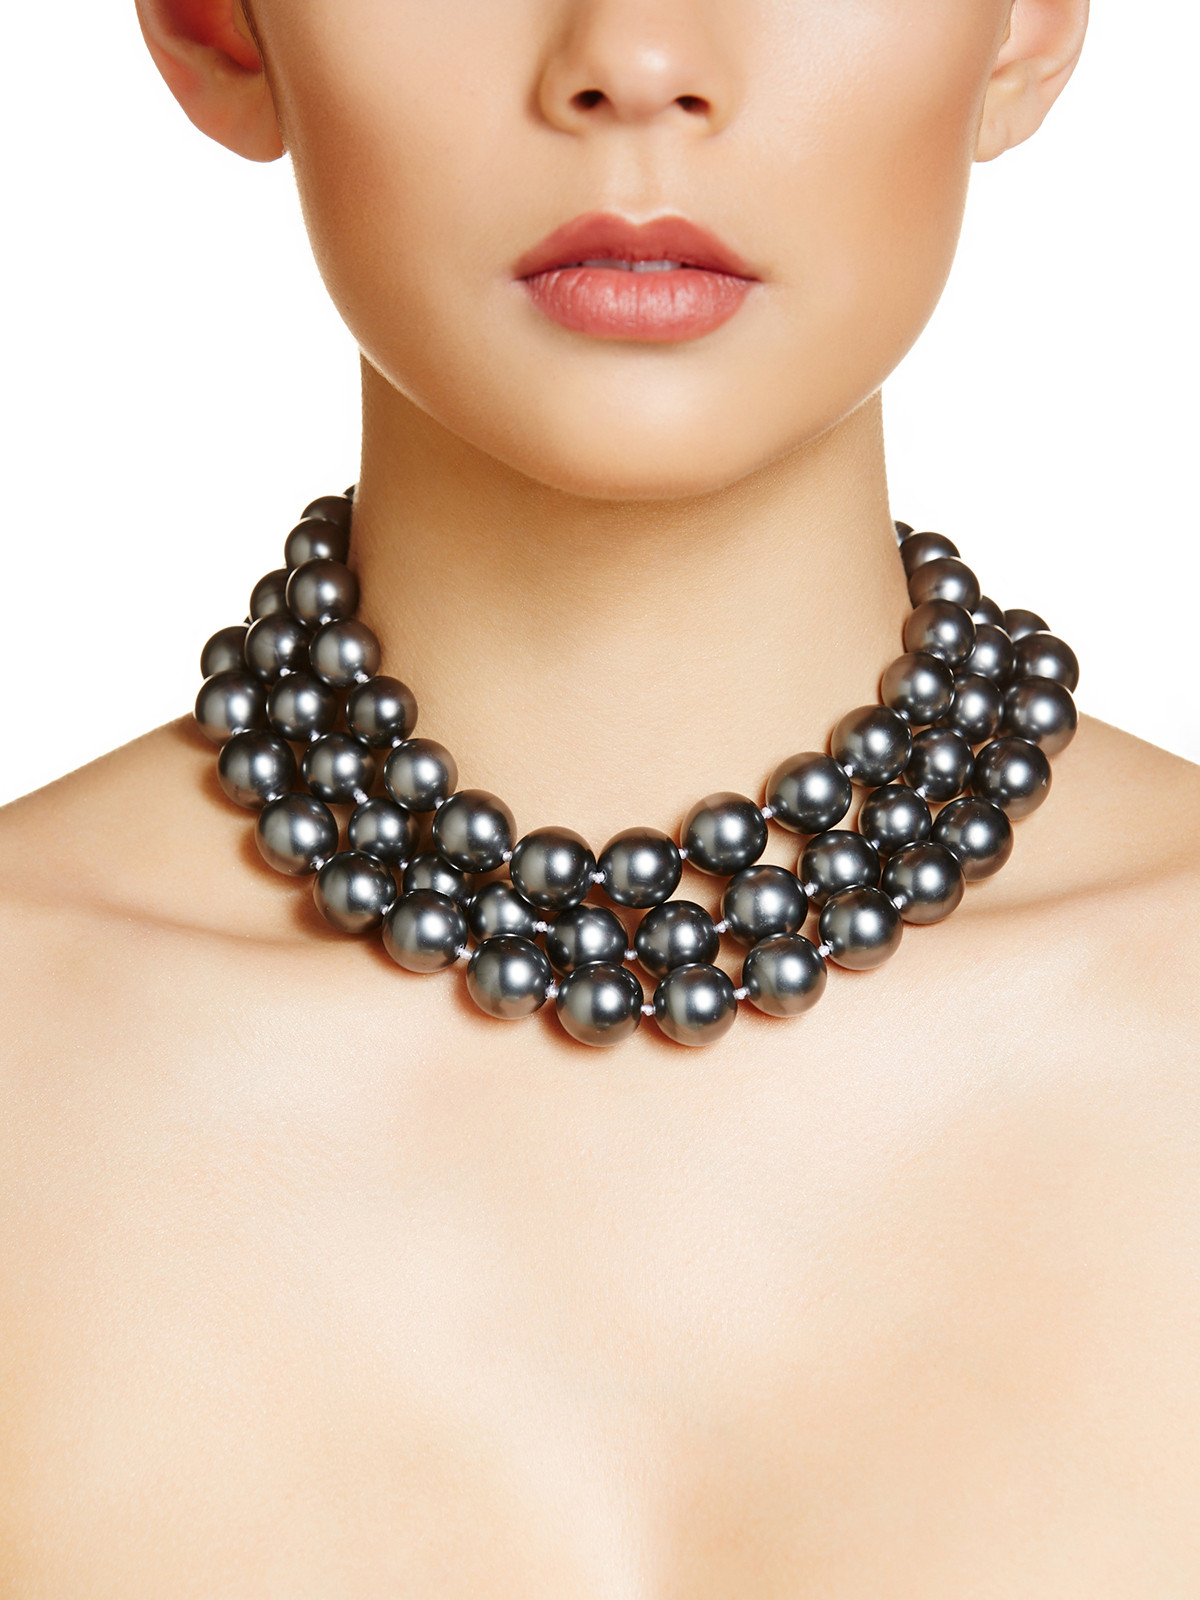 When and How to Wear Your Black Pearl Necklace - Pearls Only - Australia ::  Pearls Only - Australia